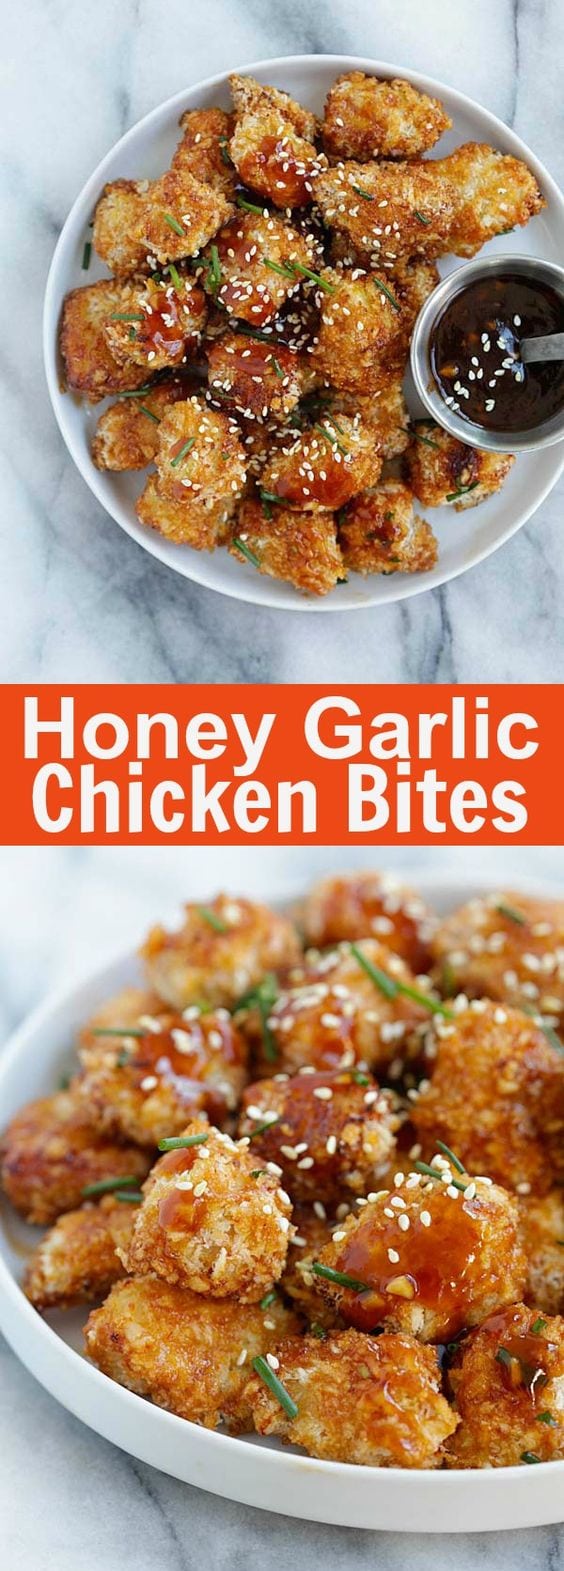 Honey Garlic Chicken Bites – panko-crusted baked chicken nuggets with a sweet and savory honey garlic sauce. So sticky sweet and good | rasamalaysia.com